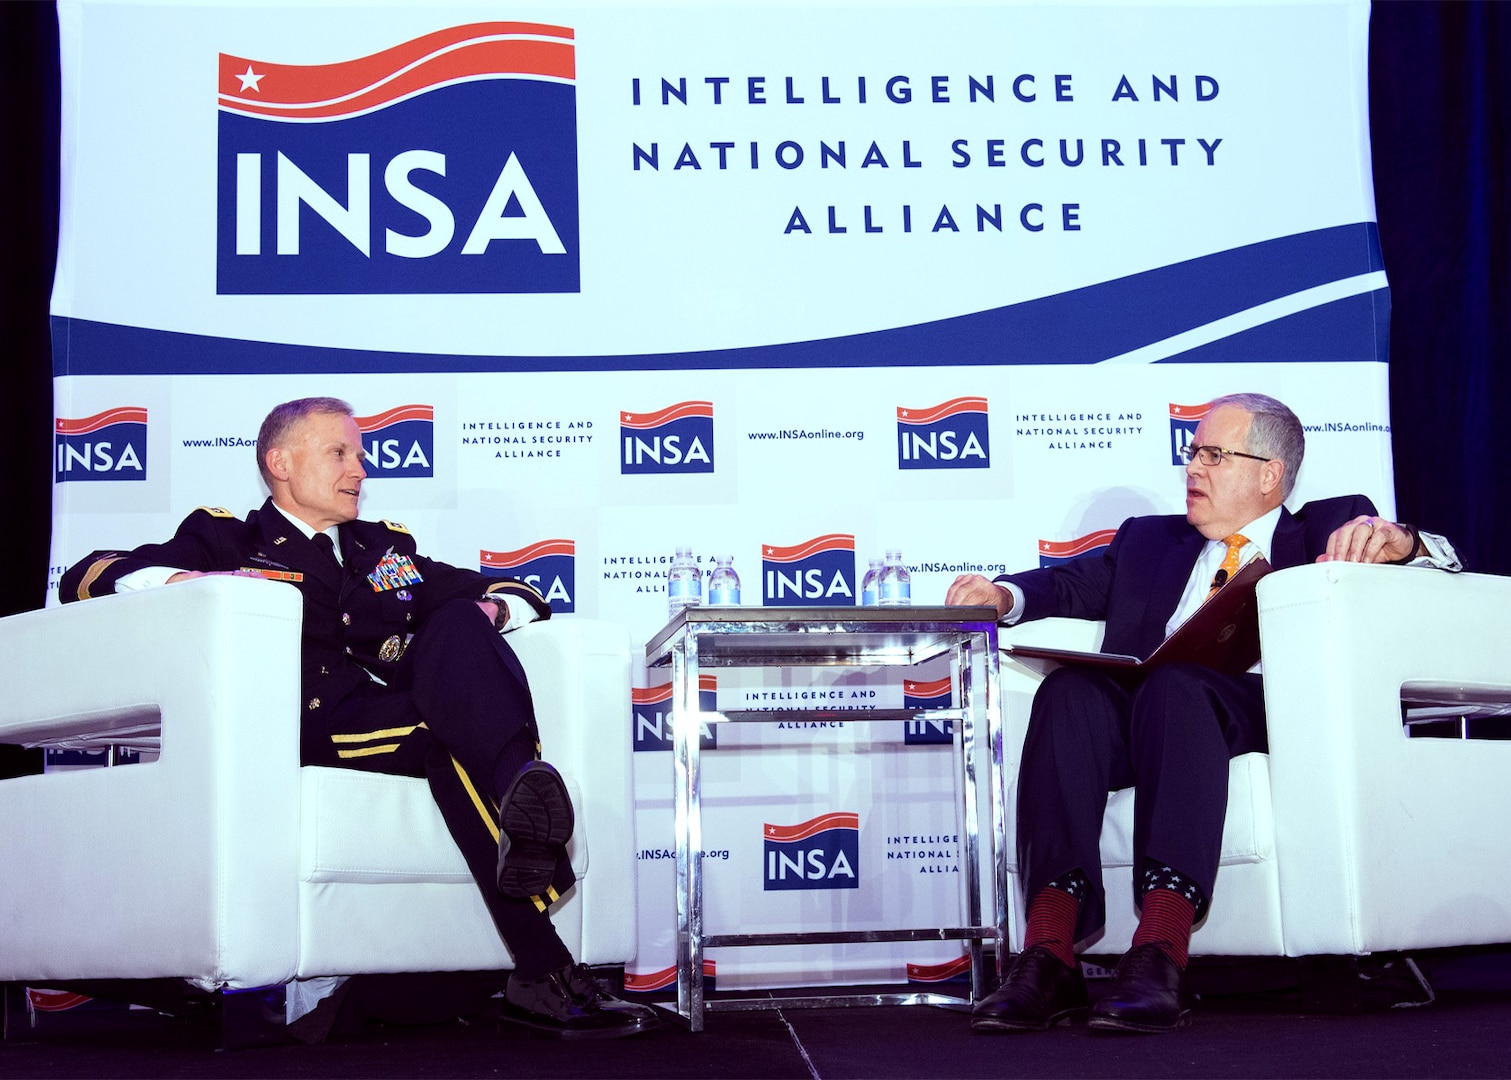 Defense Intelligence Agency (DIA) Director, LTG Robert P. Ashley and former acting DIA director David R. Shedd confer during the Intelligence and National Security Alliance (INSA) Leadership Dinner at the Renaissance Arlington Capital View Hotel, Arlington, VA, Thursday, March 8, 2018. Photo courtesy of INSA, © 2018 Herman Farrer Photography.